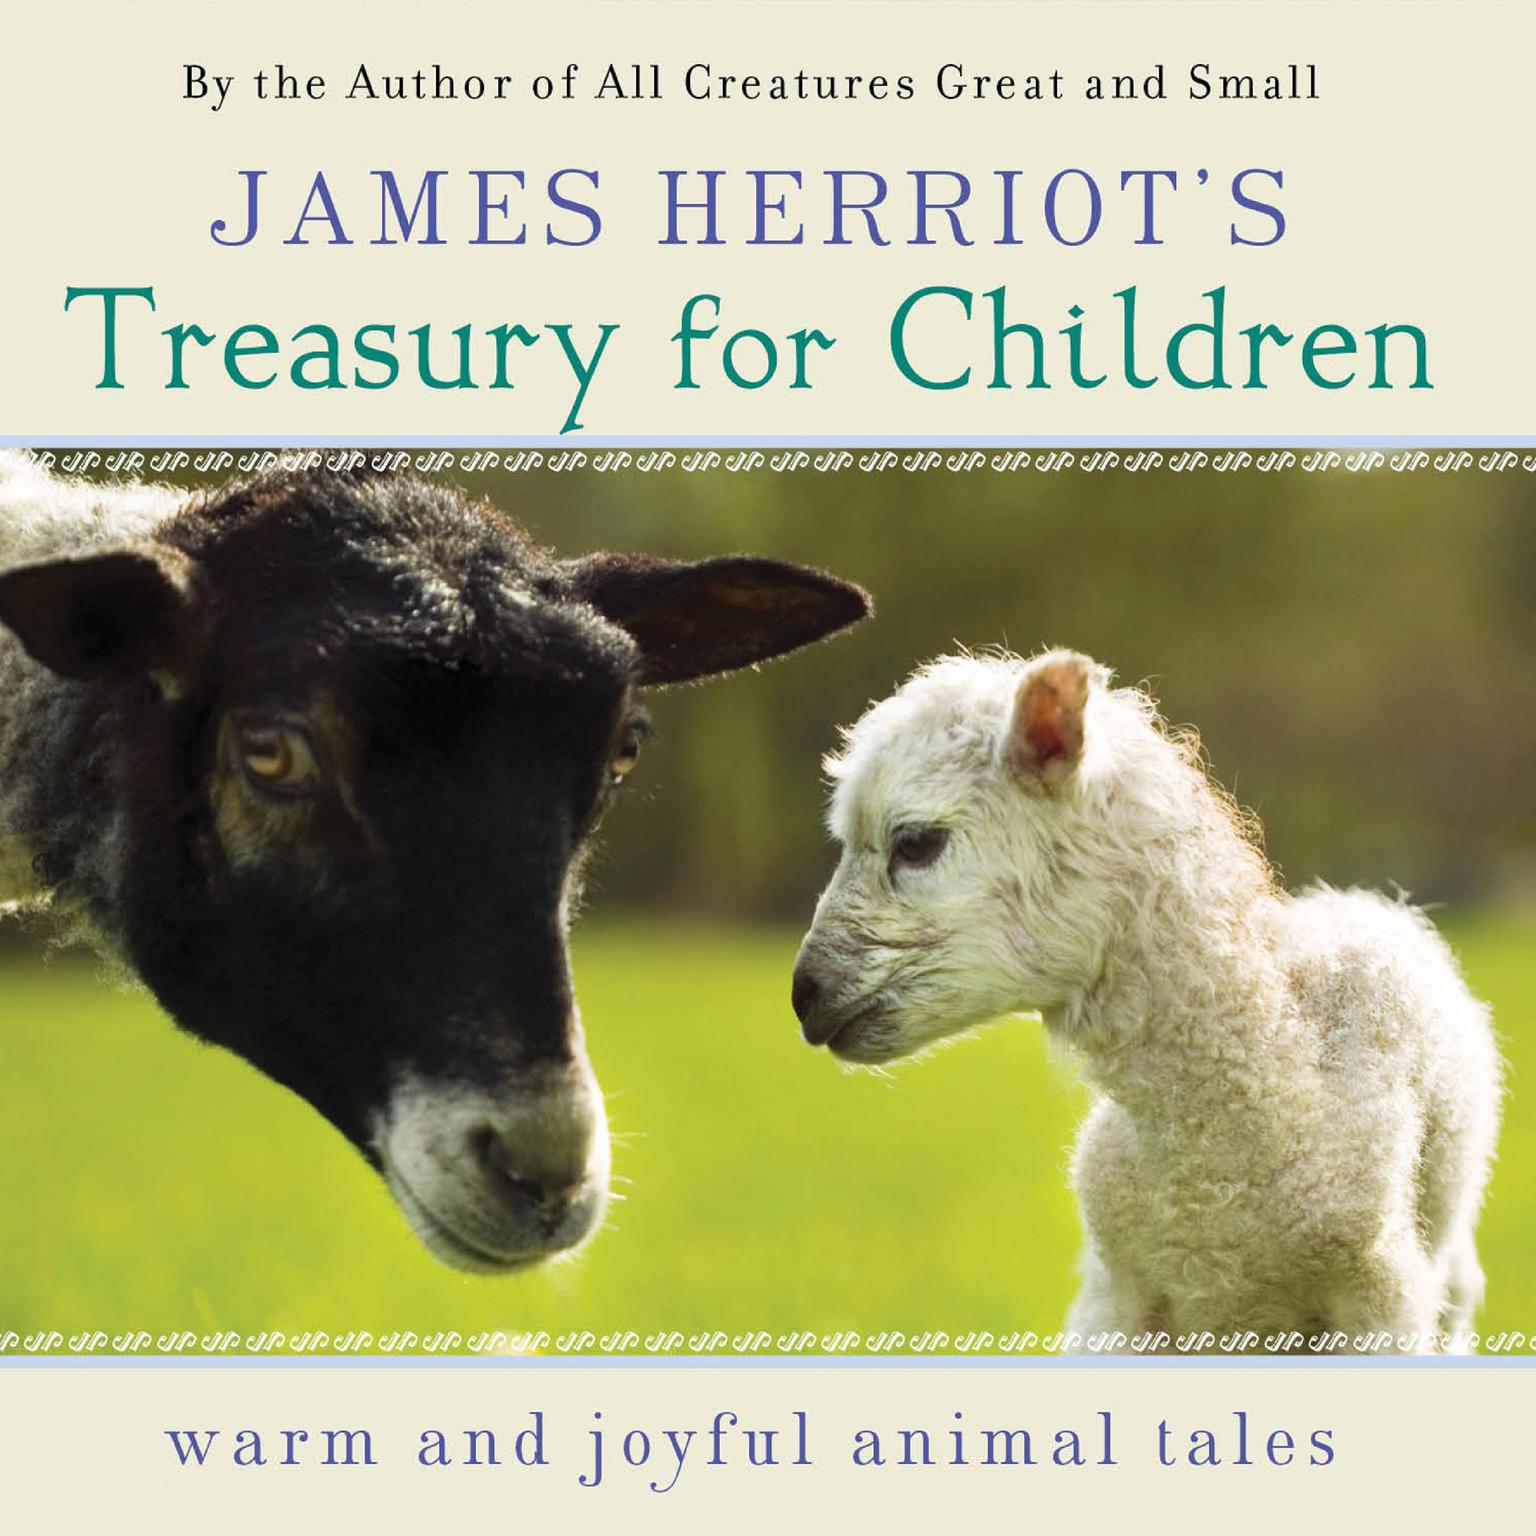 James Herriots Treasury for Children: Warm and Joyful Tales by the Author of All Creatures Great and Small Audiobook, by James Herriot